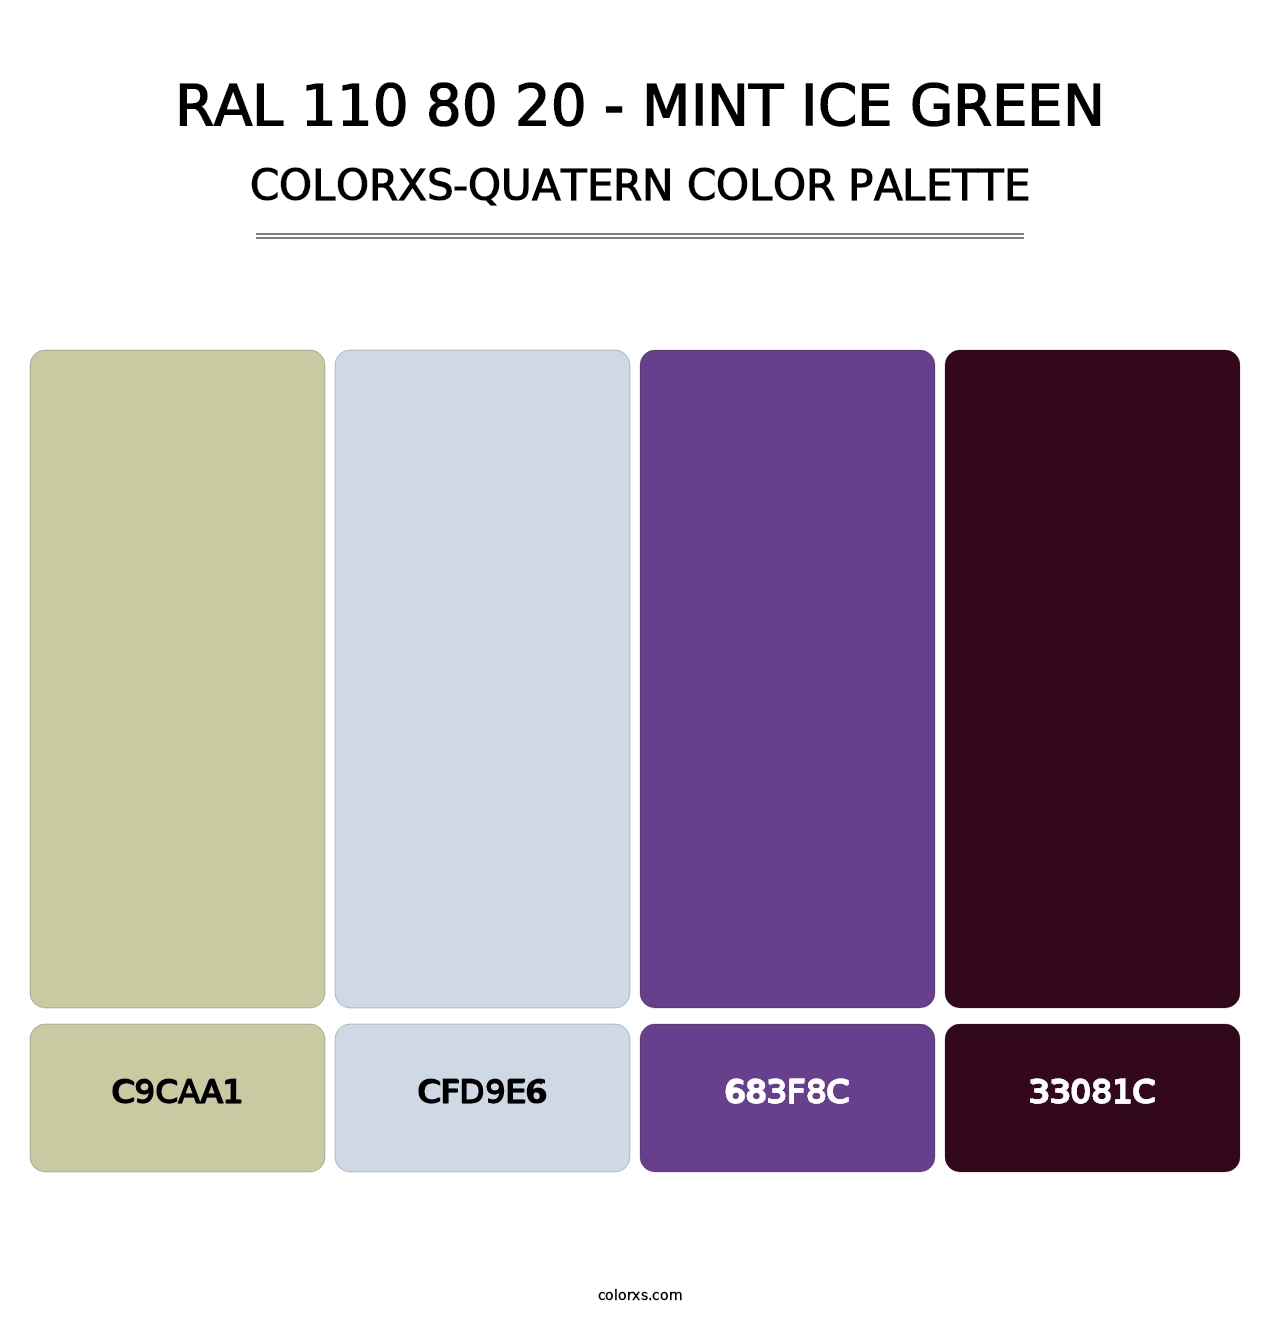 RAL 110 80 20 - Mint Ice Green - Colorxs Quatern Palette